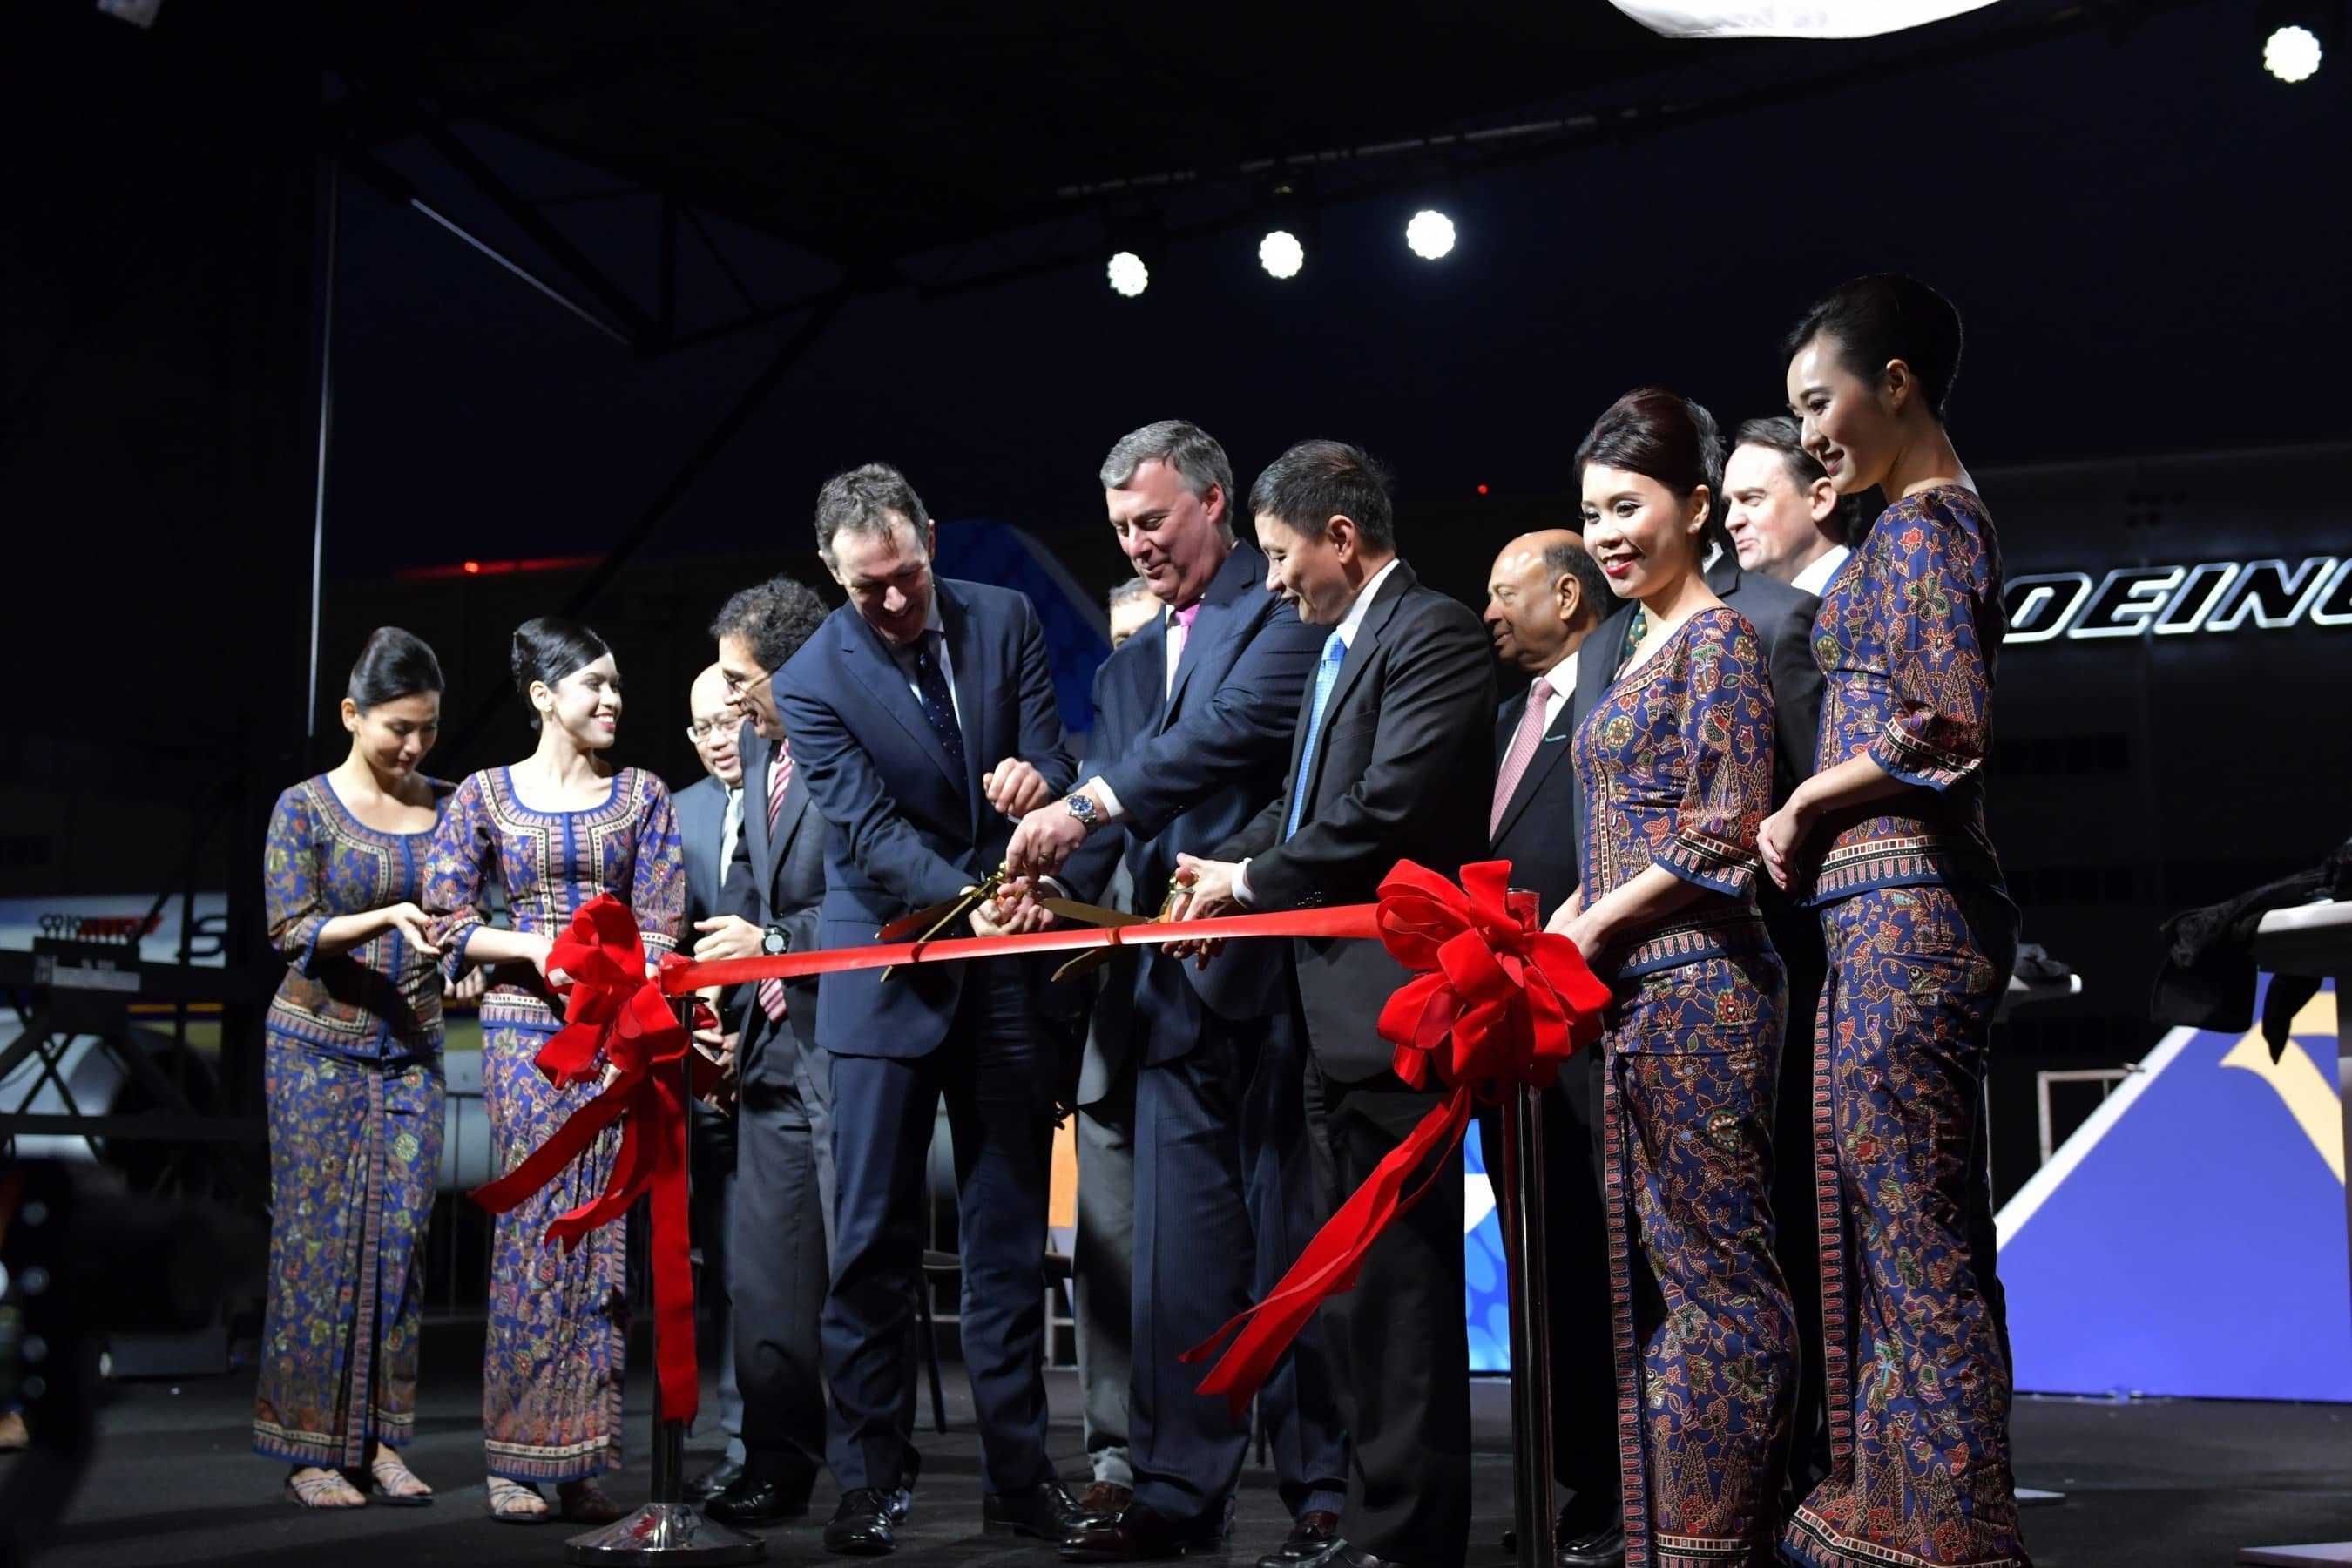 Boeing and Singapore Airlines Ribbon Cutting